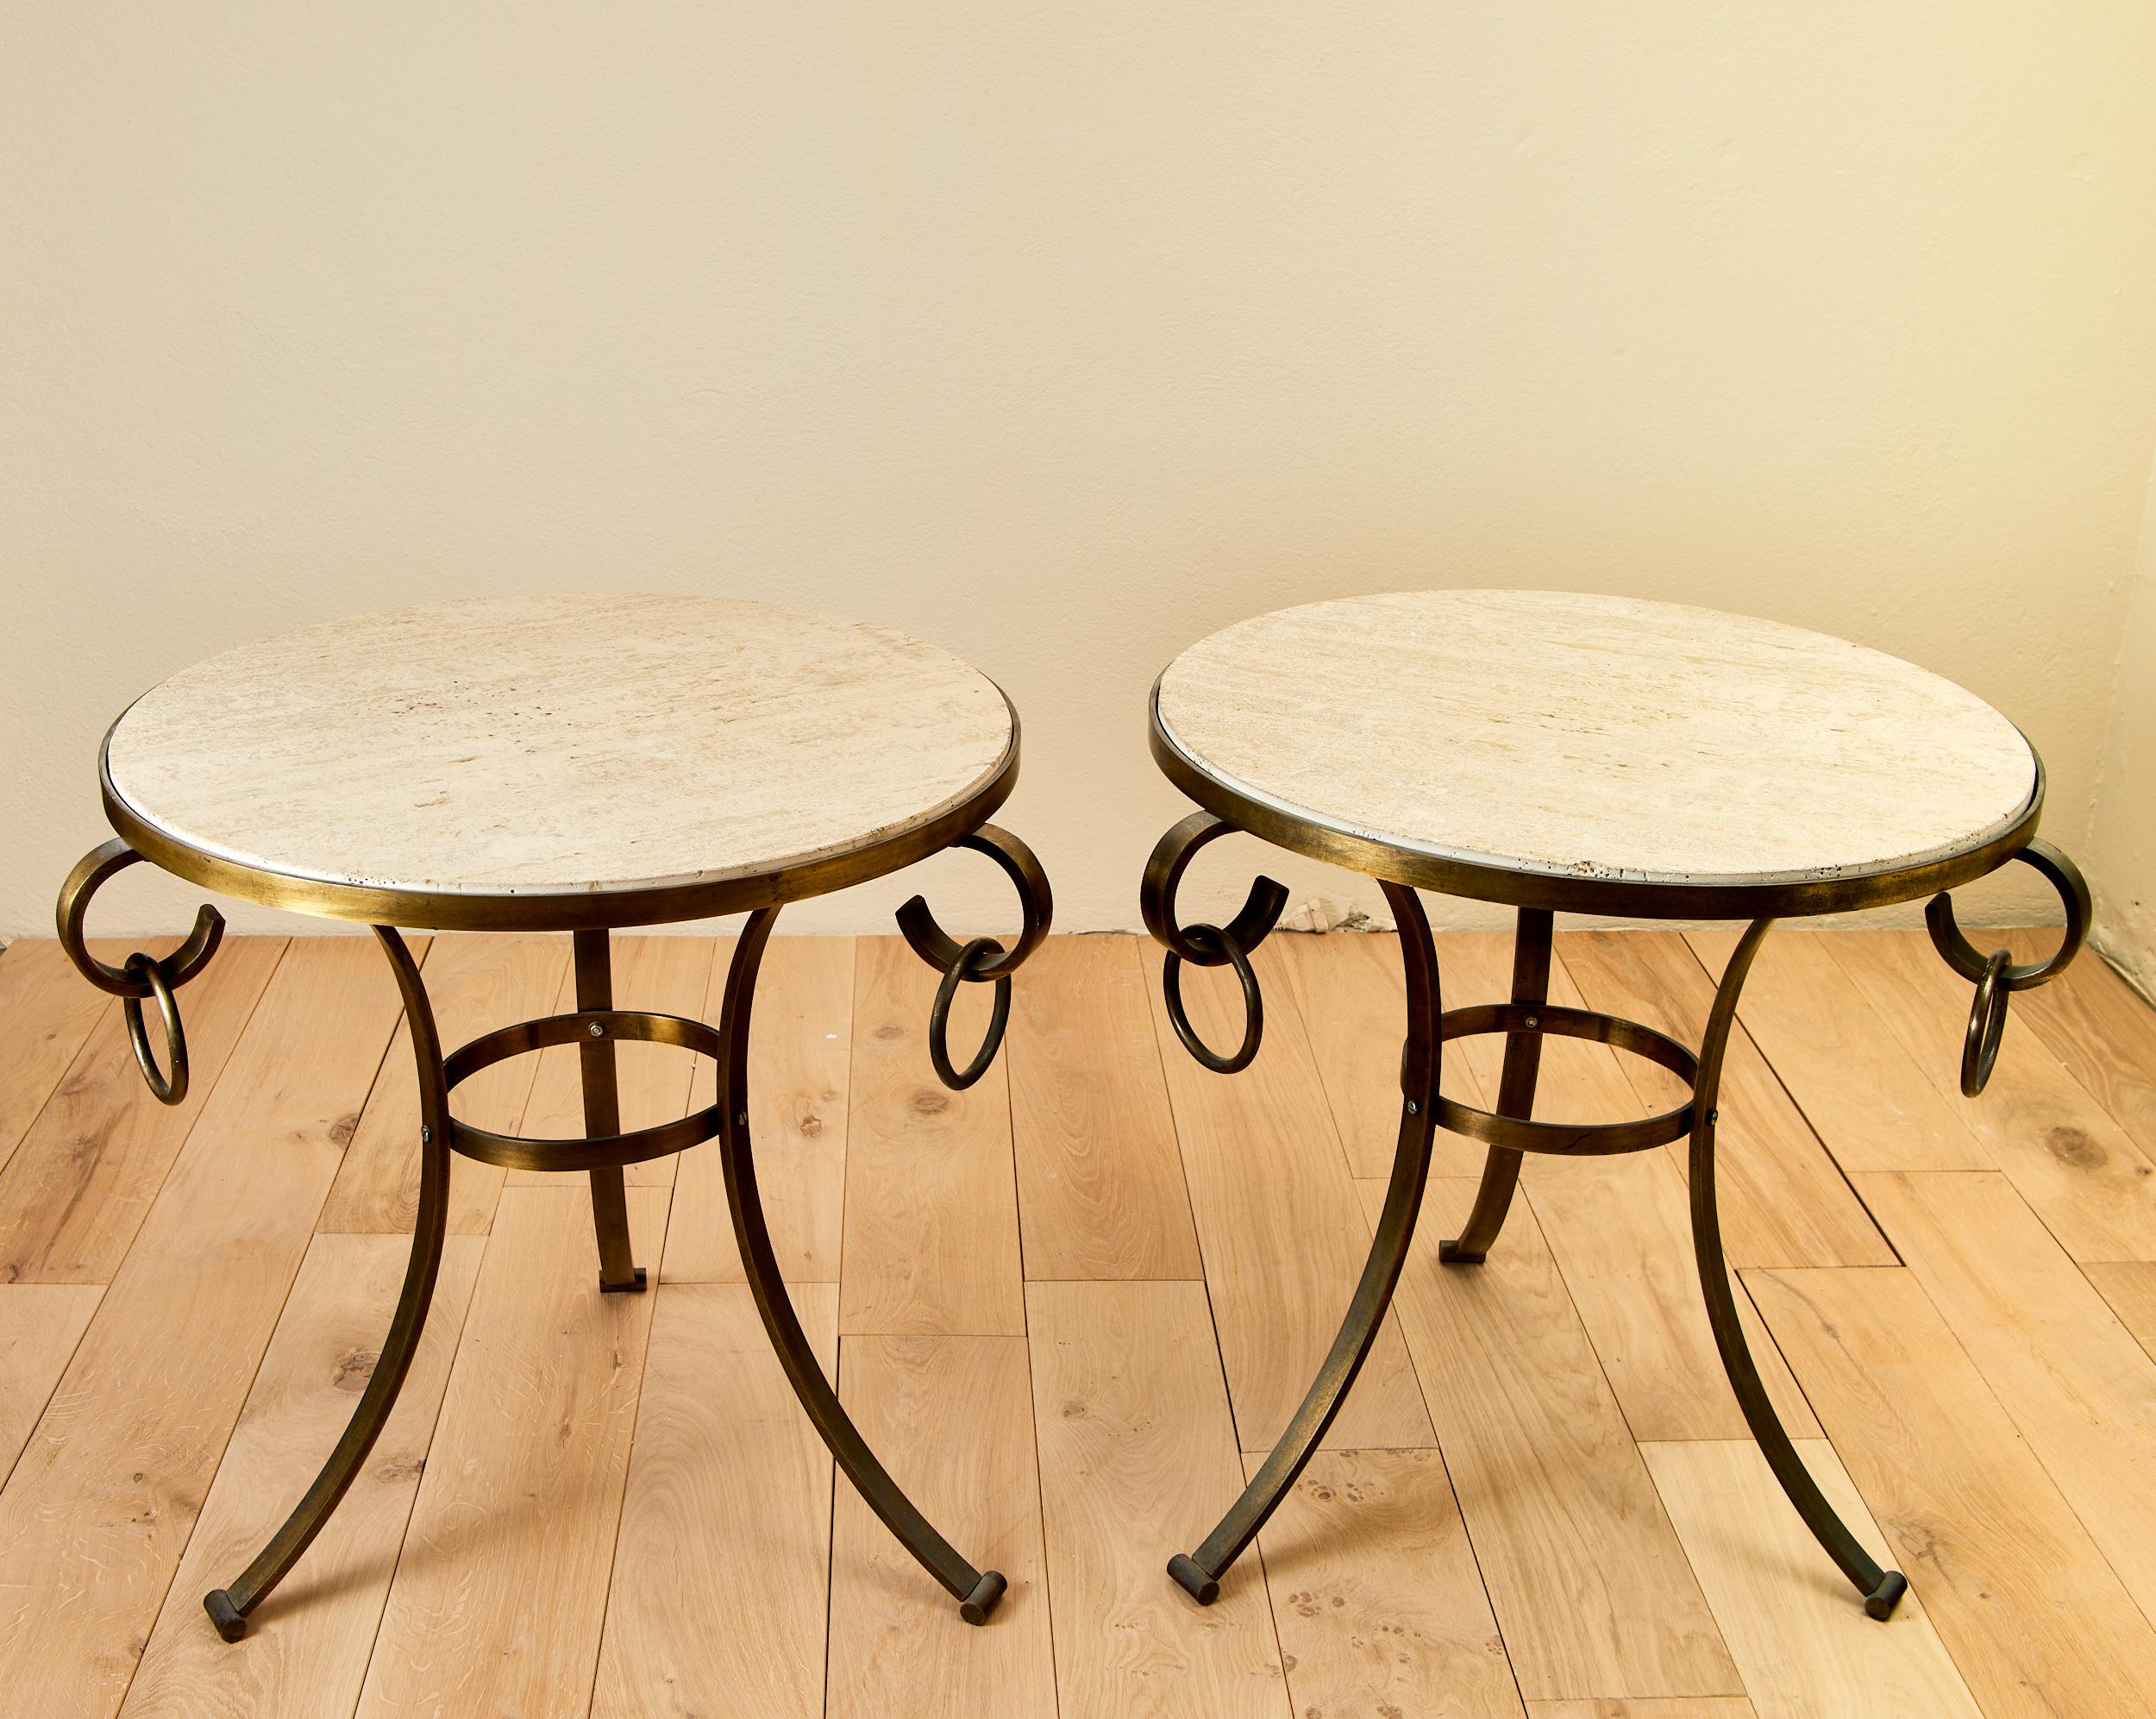 French Pair of Neo Classic Pedestal Tables, Silver Iron and Brass Frame, Travertine Top